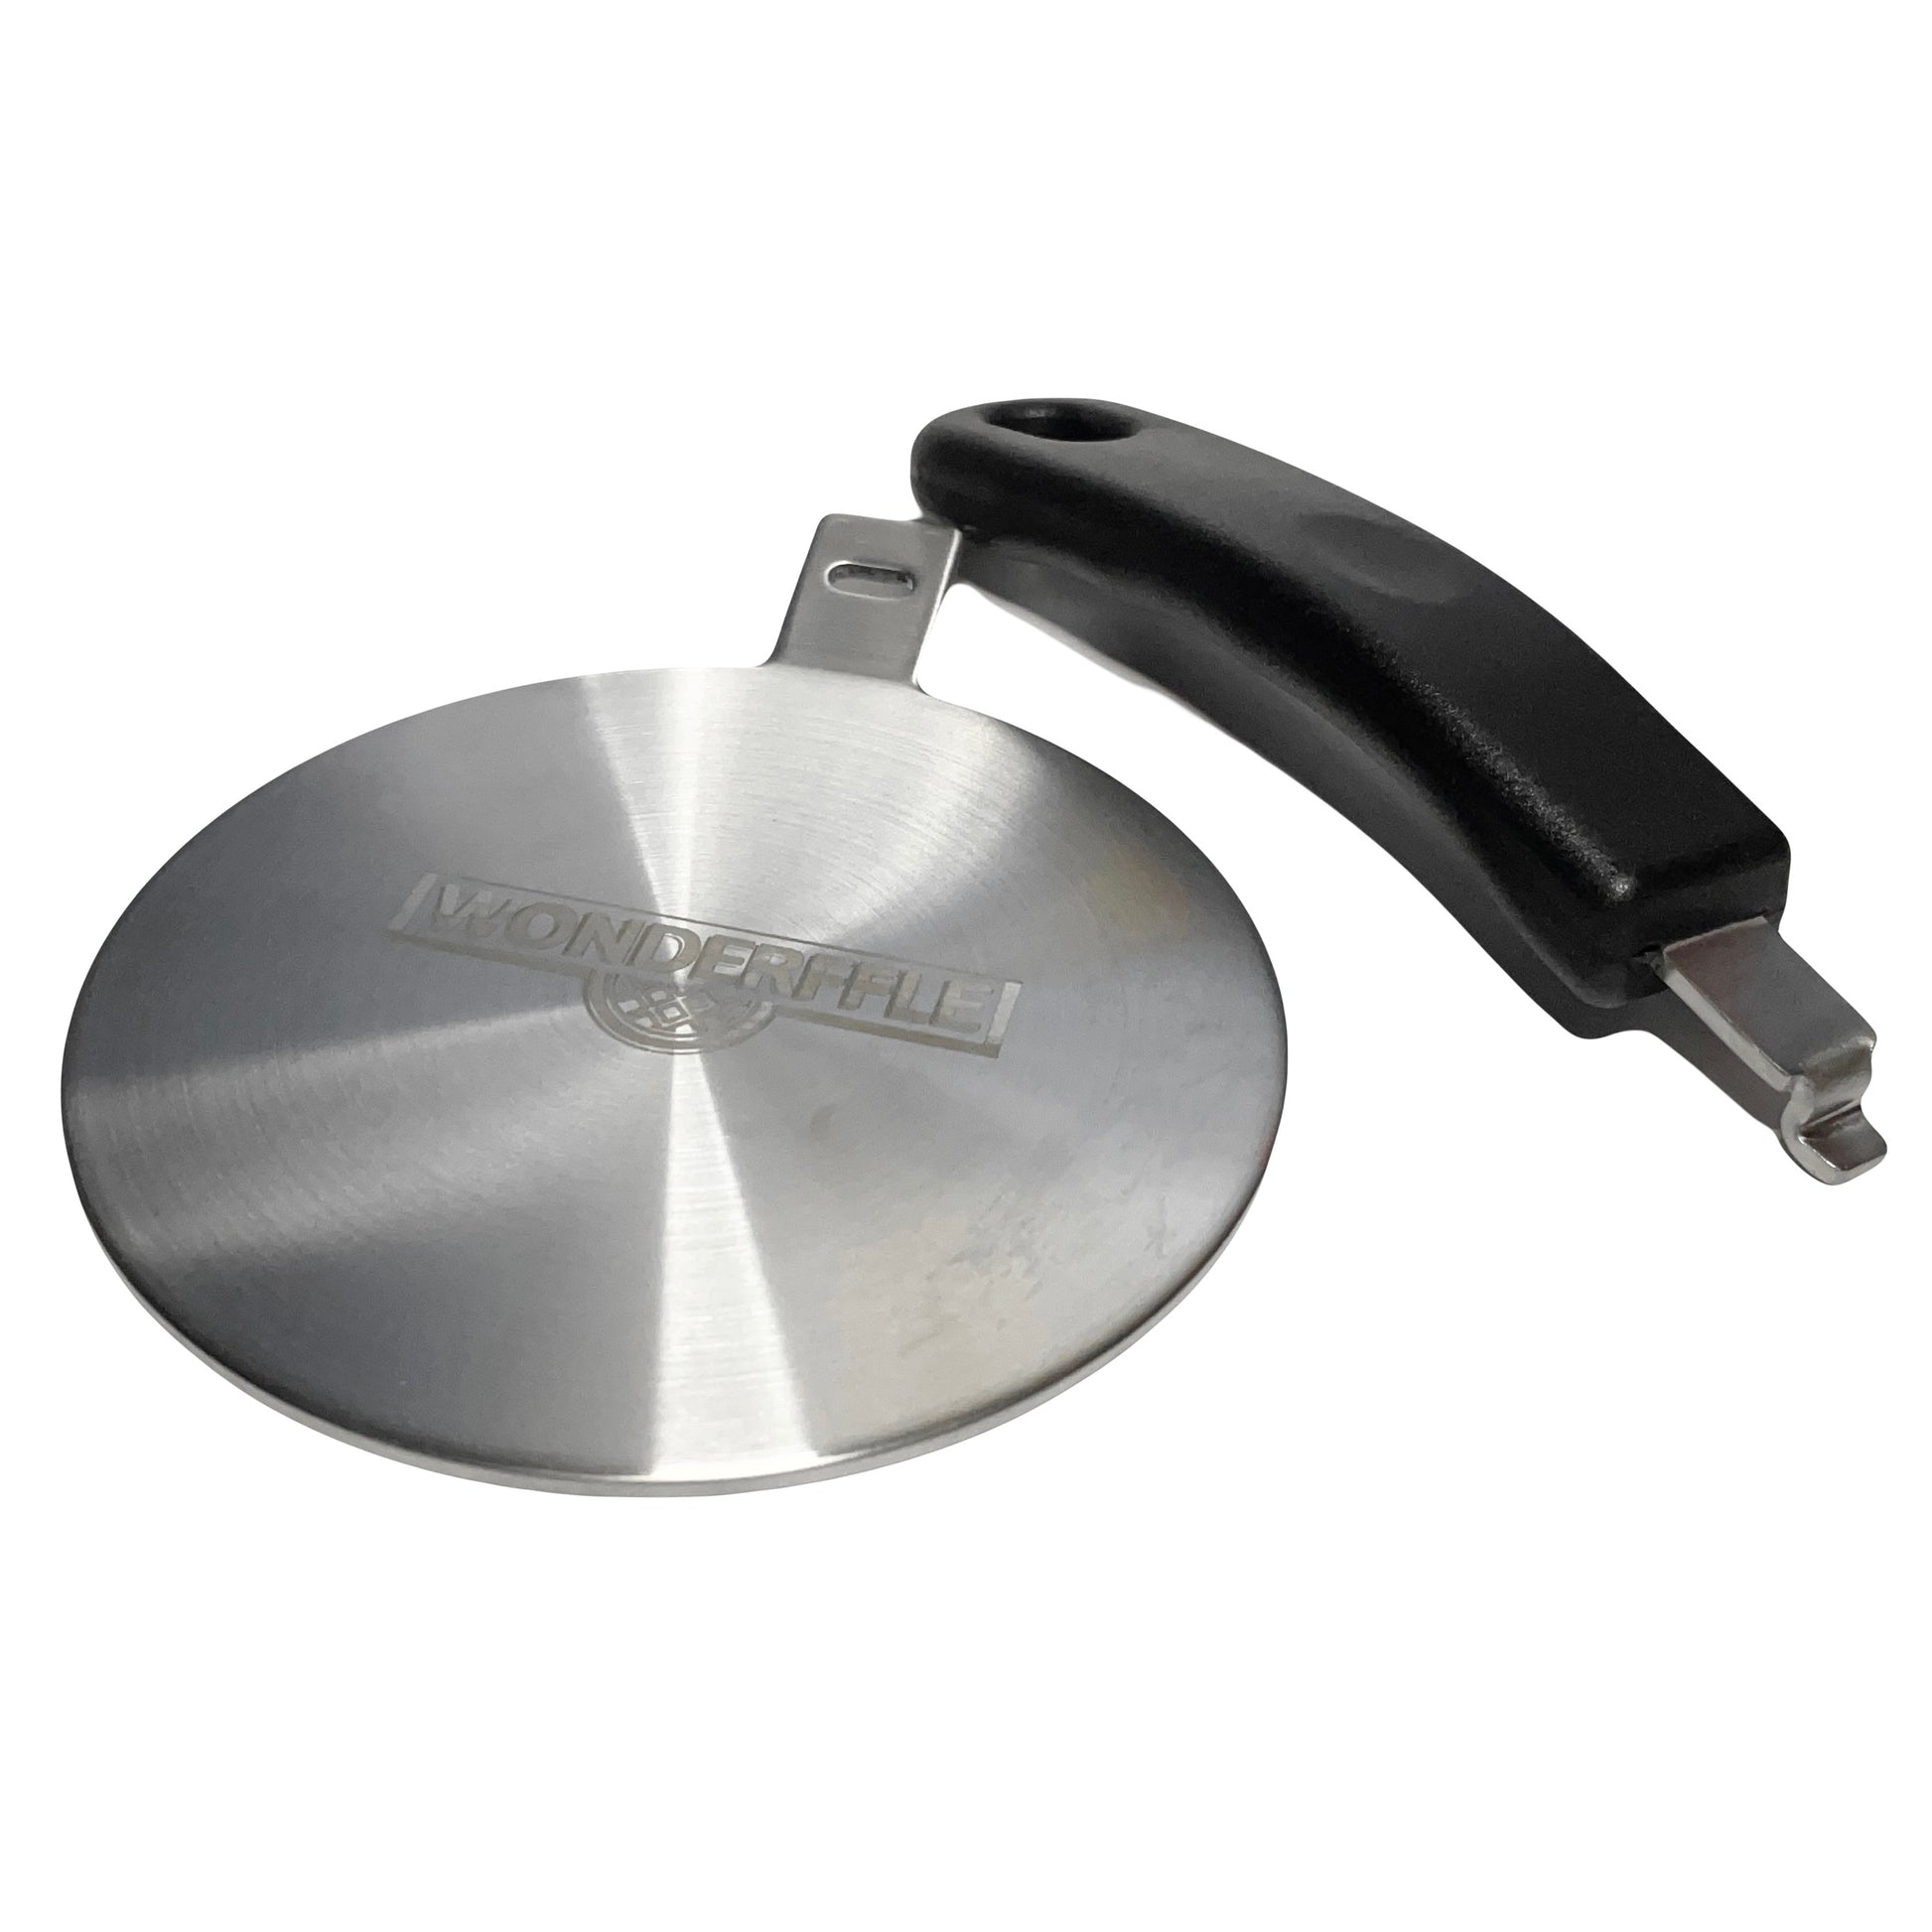 Induction Cooker Adapter Plate, Induction Cooktop Adapter